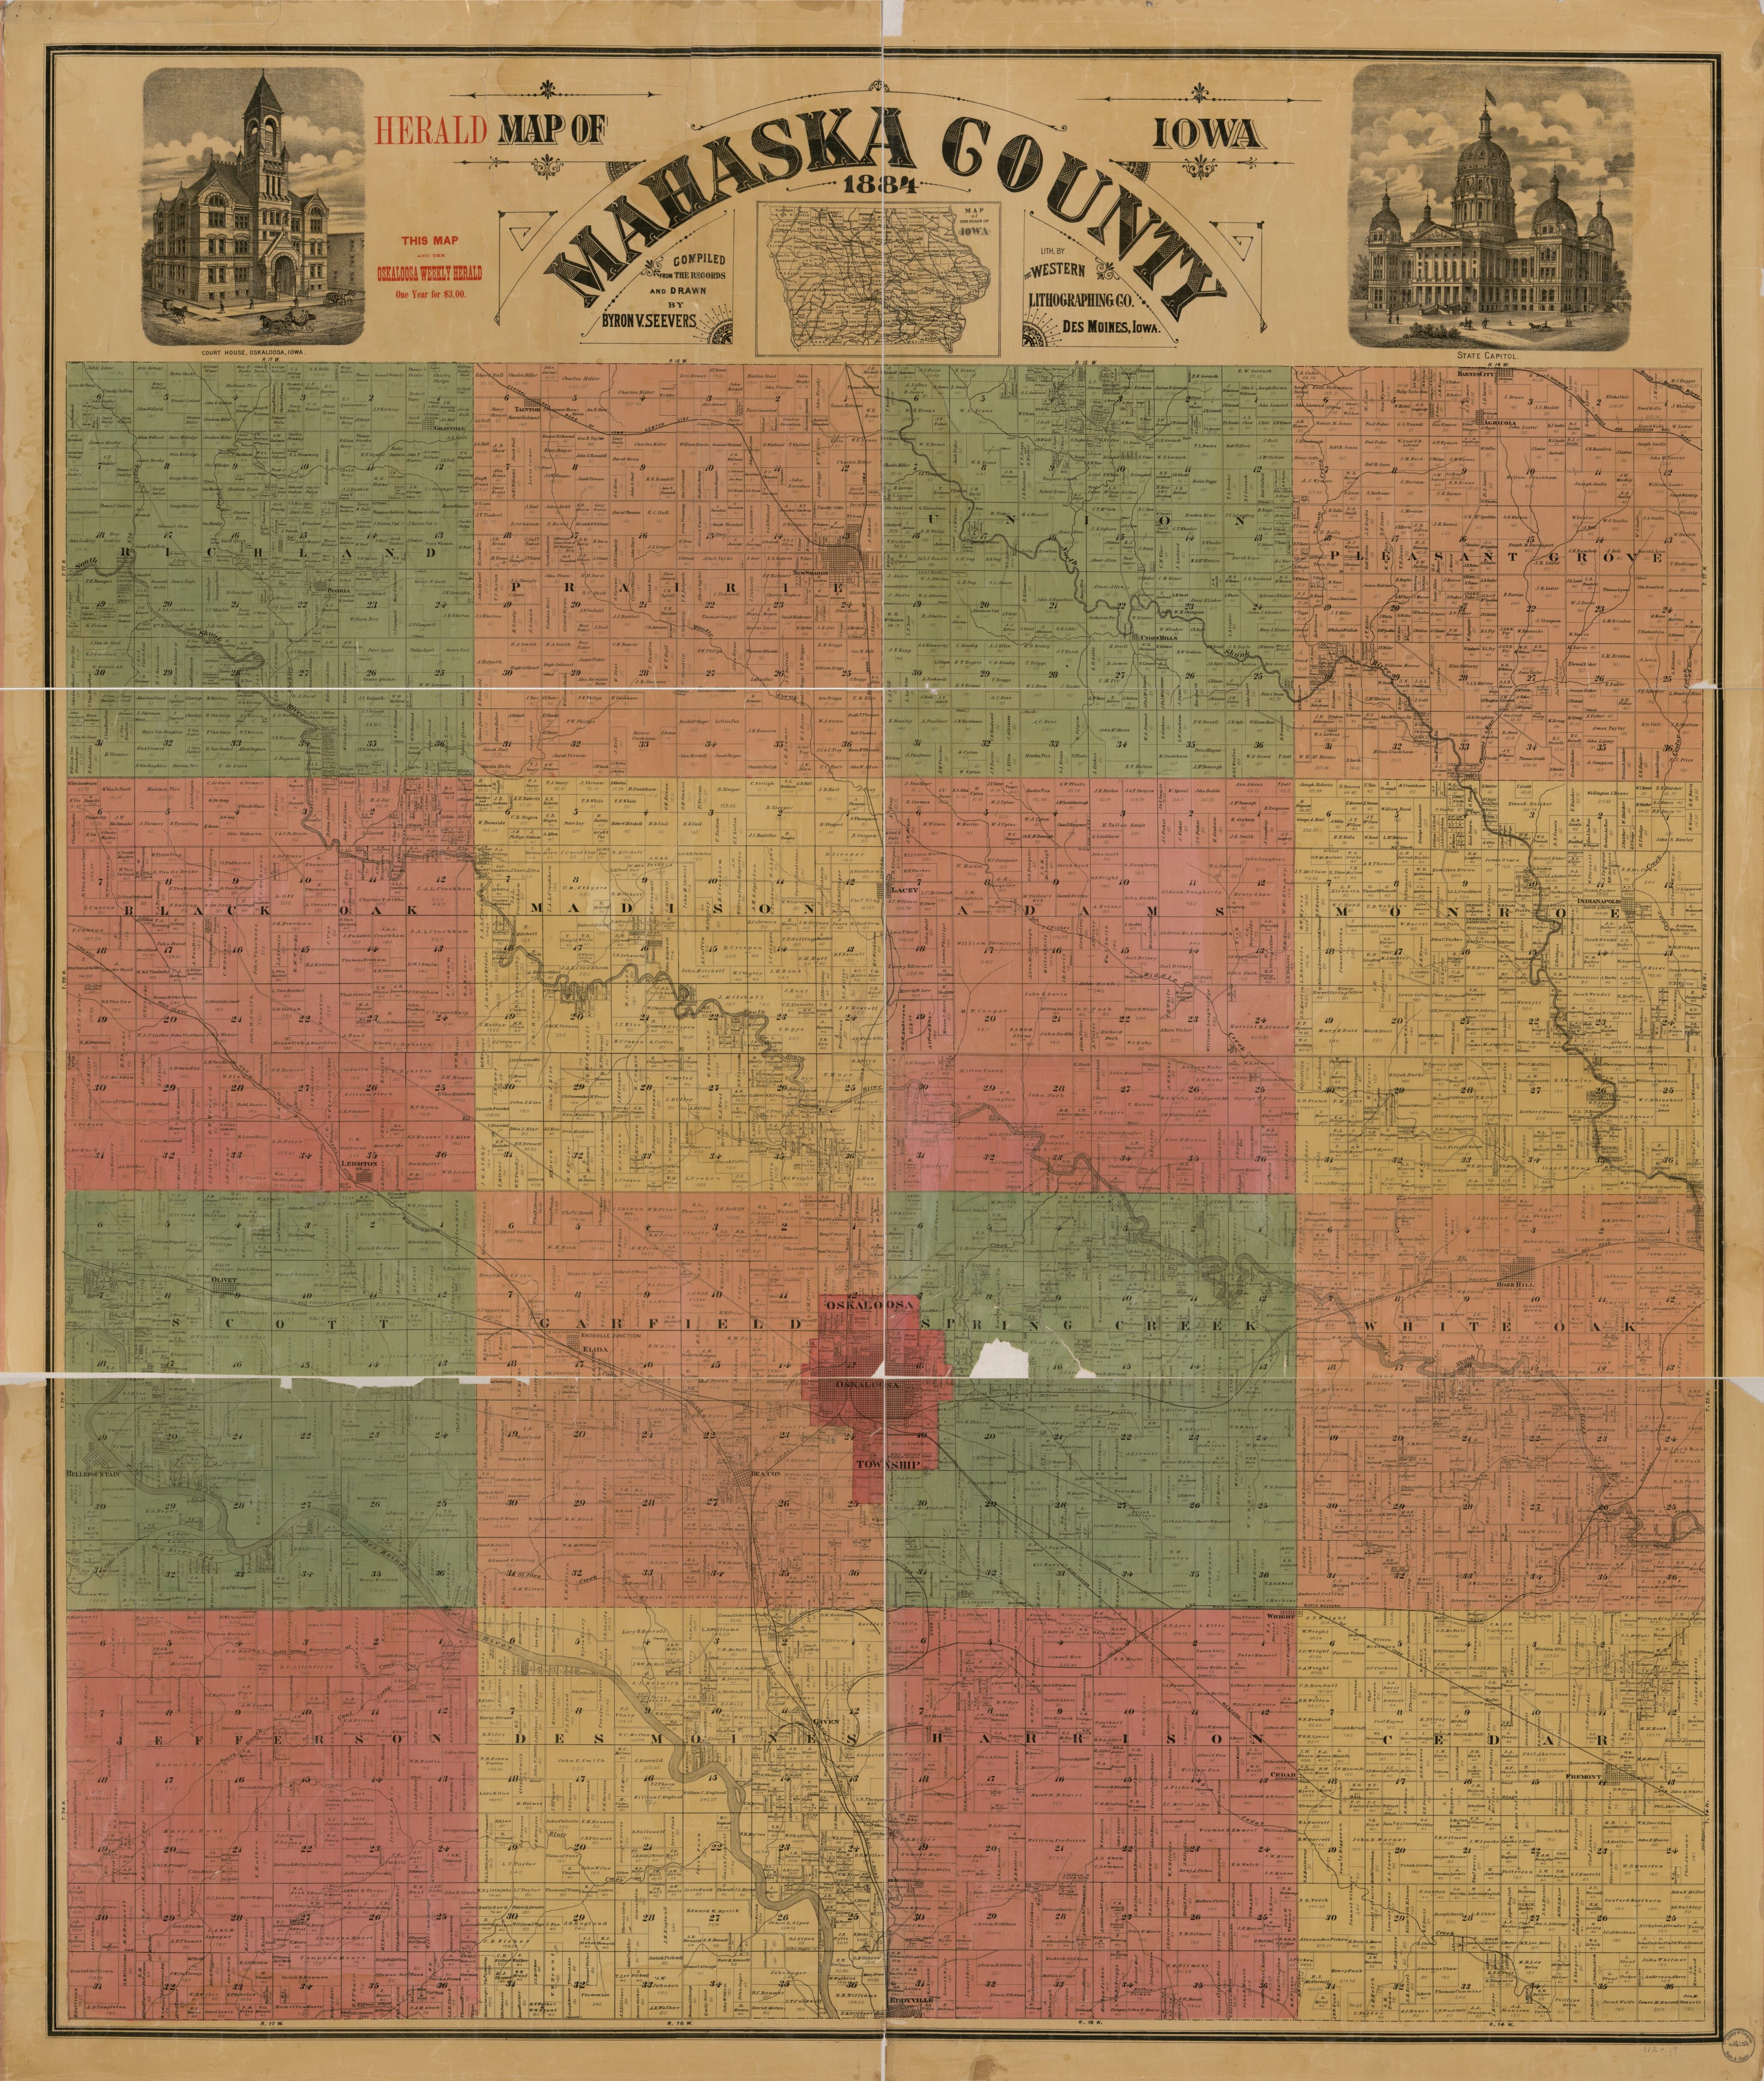 This old map of Herald Map of Mahaska County, Iowa from 1884 was created by Byron V. Seevers in 1884